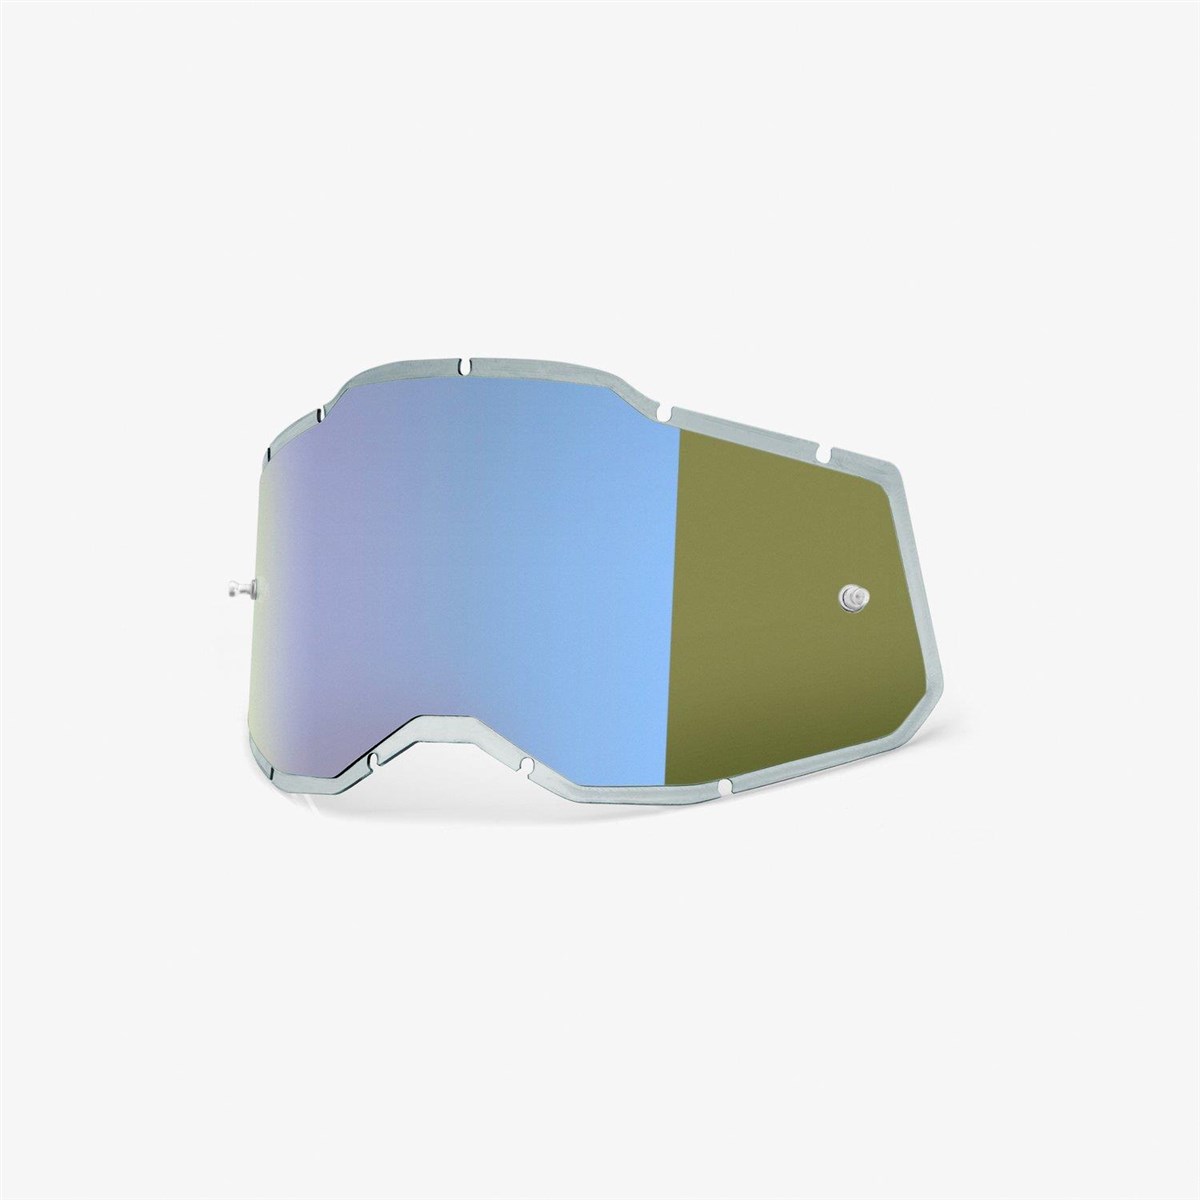 100% Racecraft2/Accuri2/Strata2 Replacement Injected Mirror Lens product image